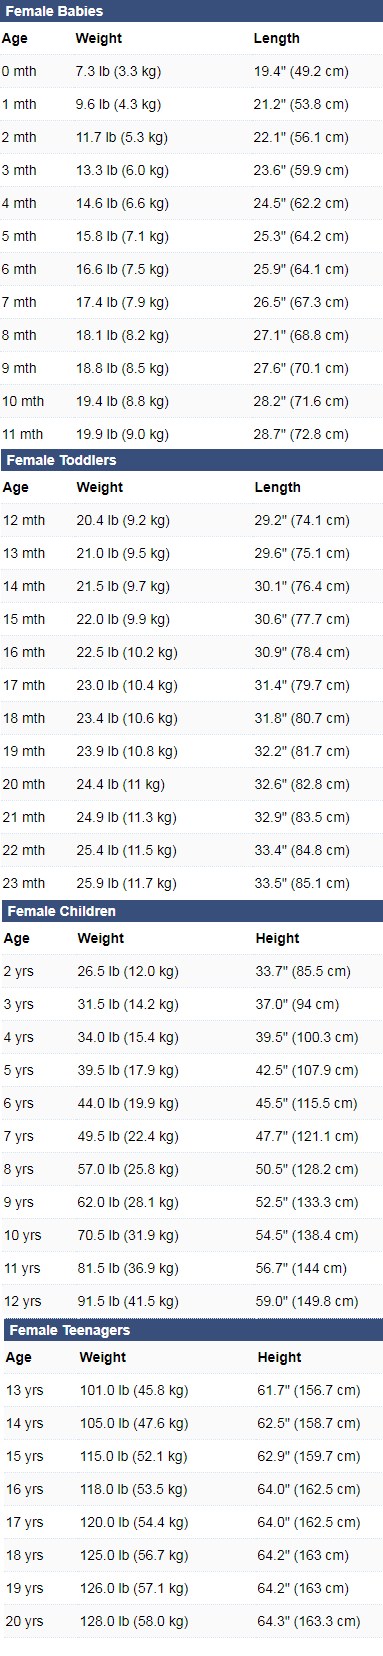 female babies height and weight chart